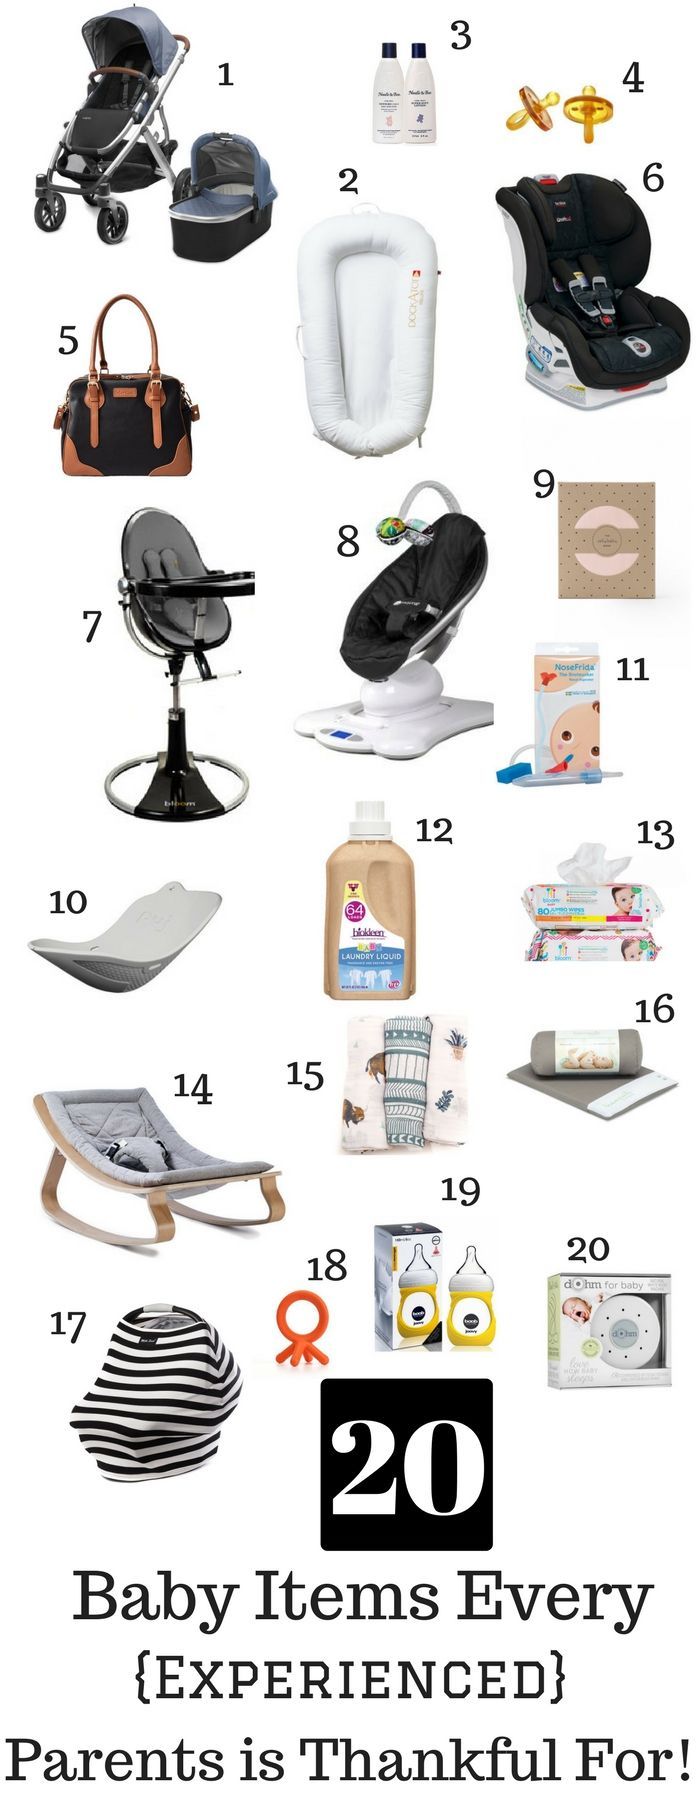 johnson baby products